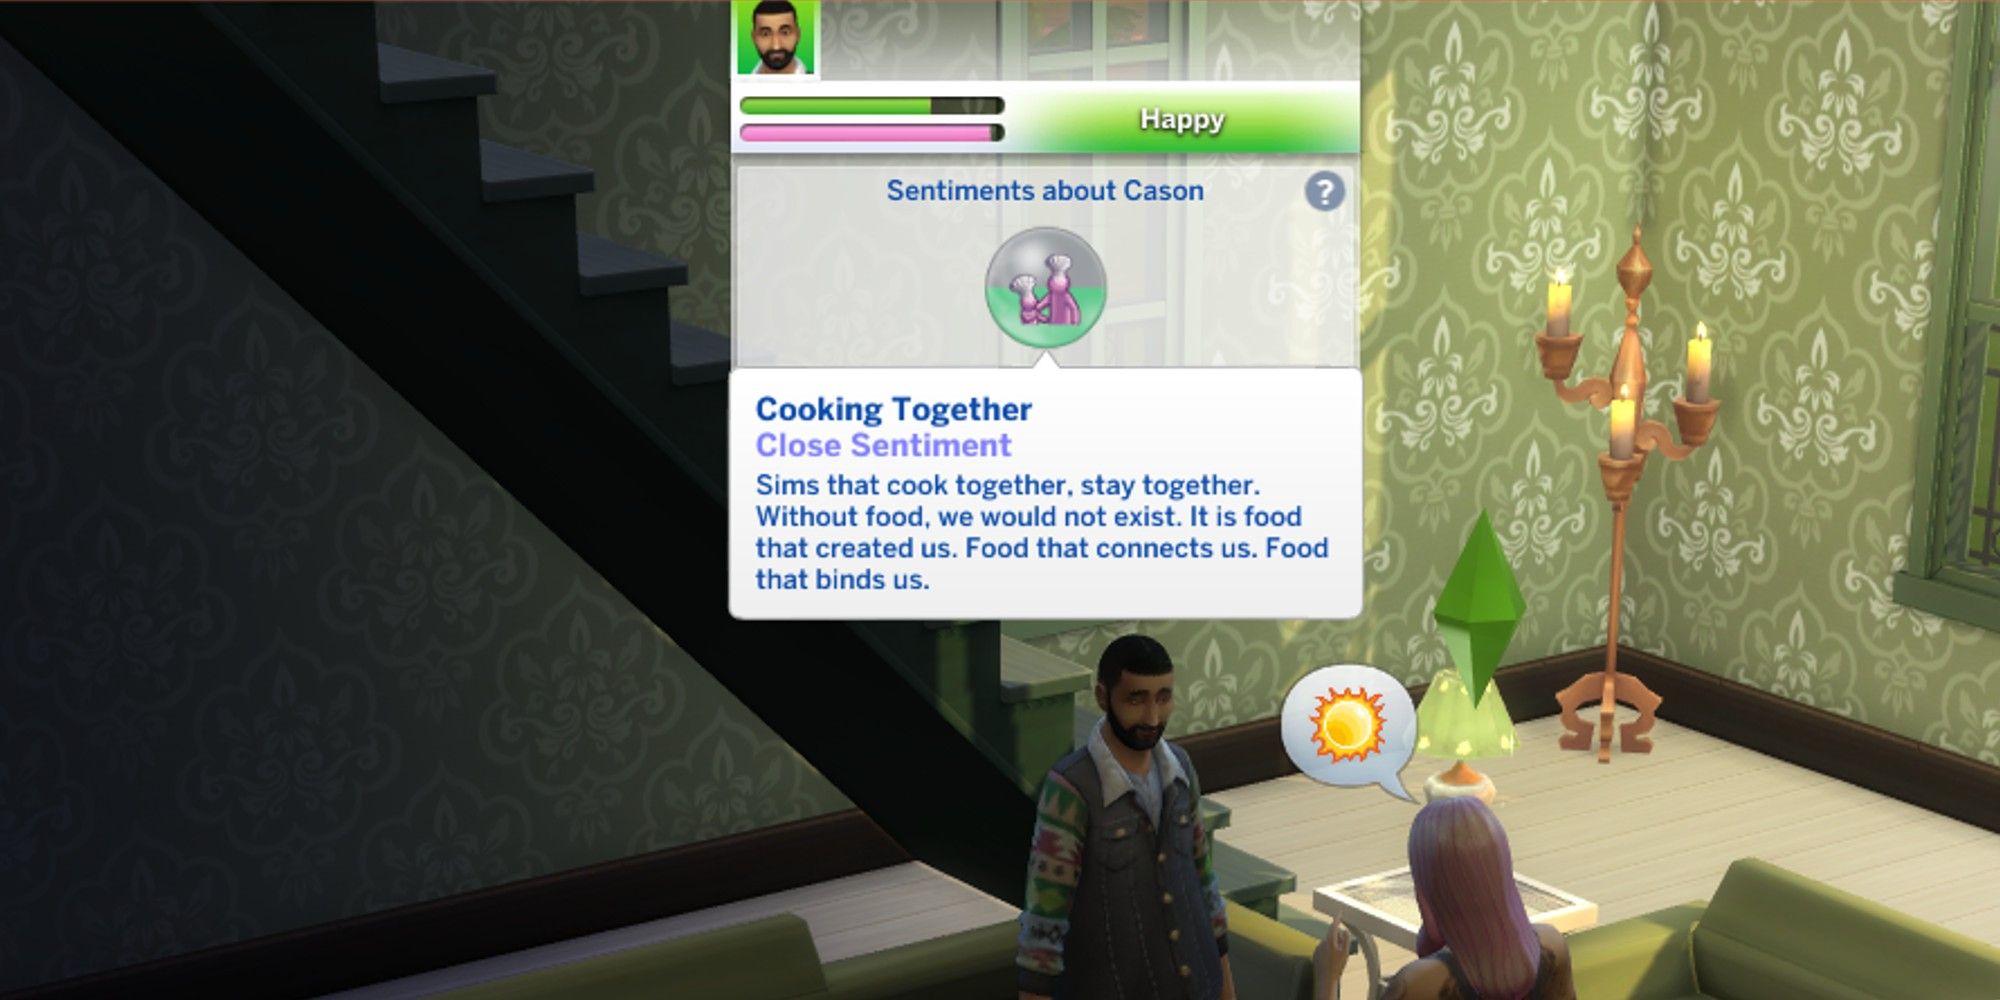 sims having a conversation, with all sentiments displayed